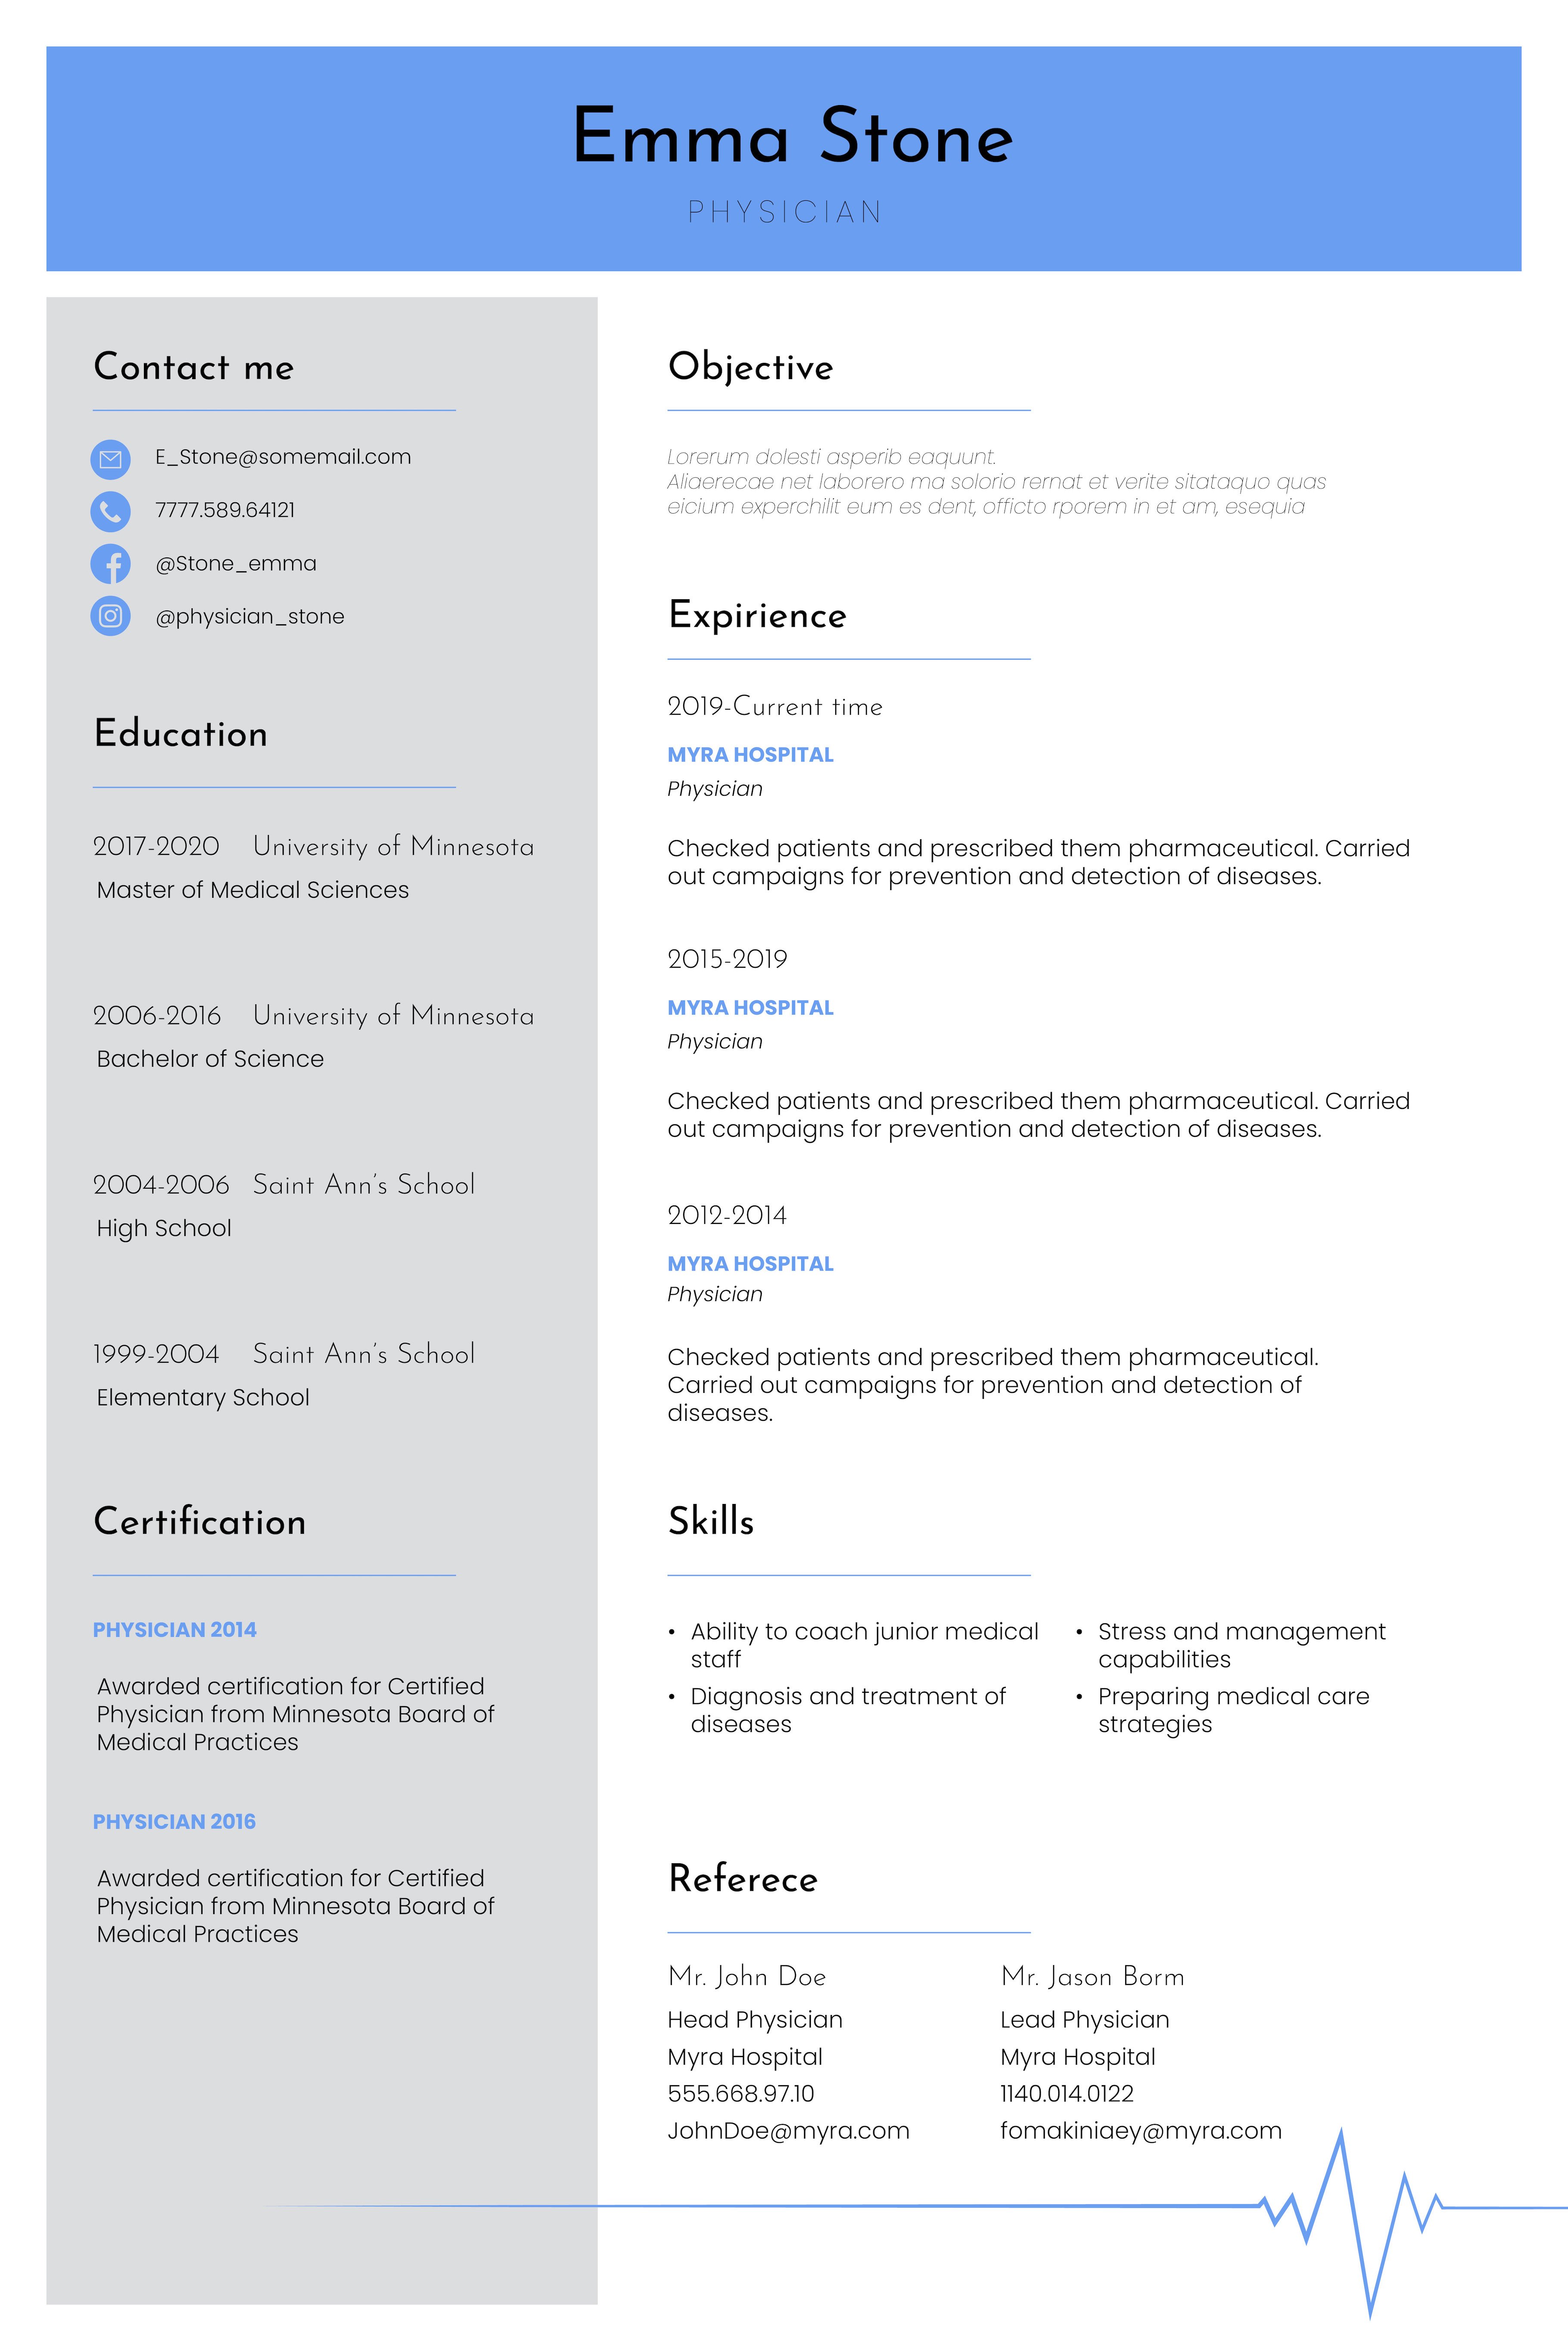 Resume Template Physician InDesign preview image.